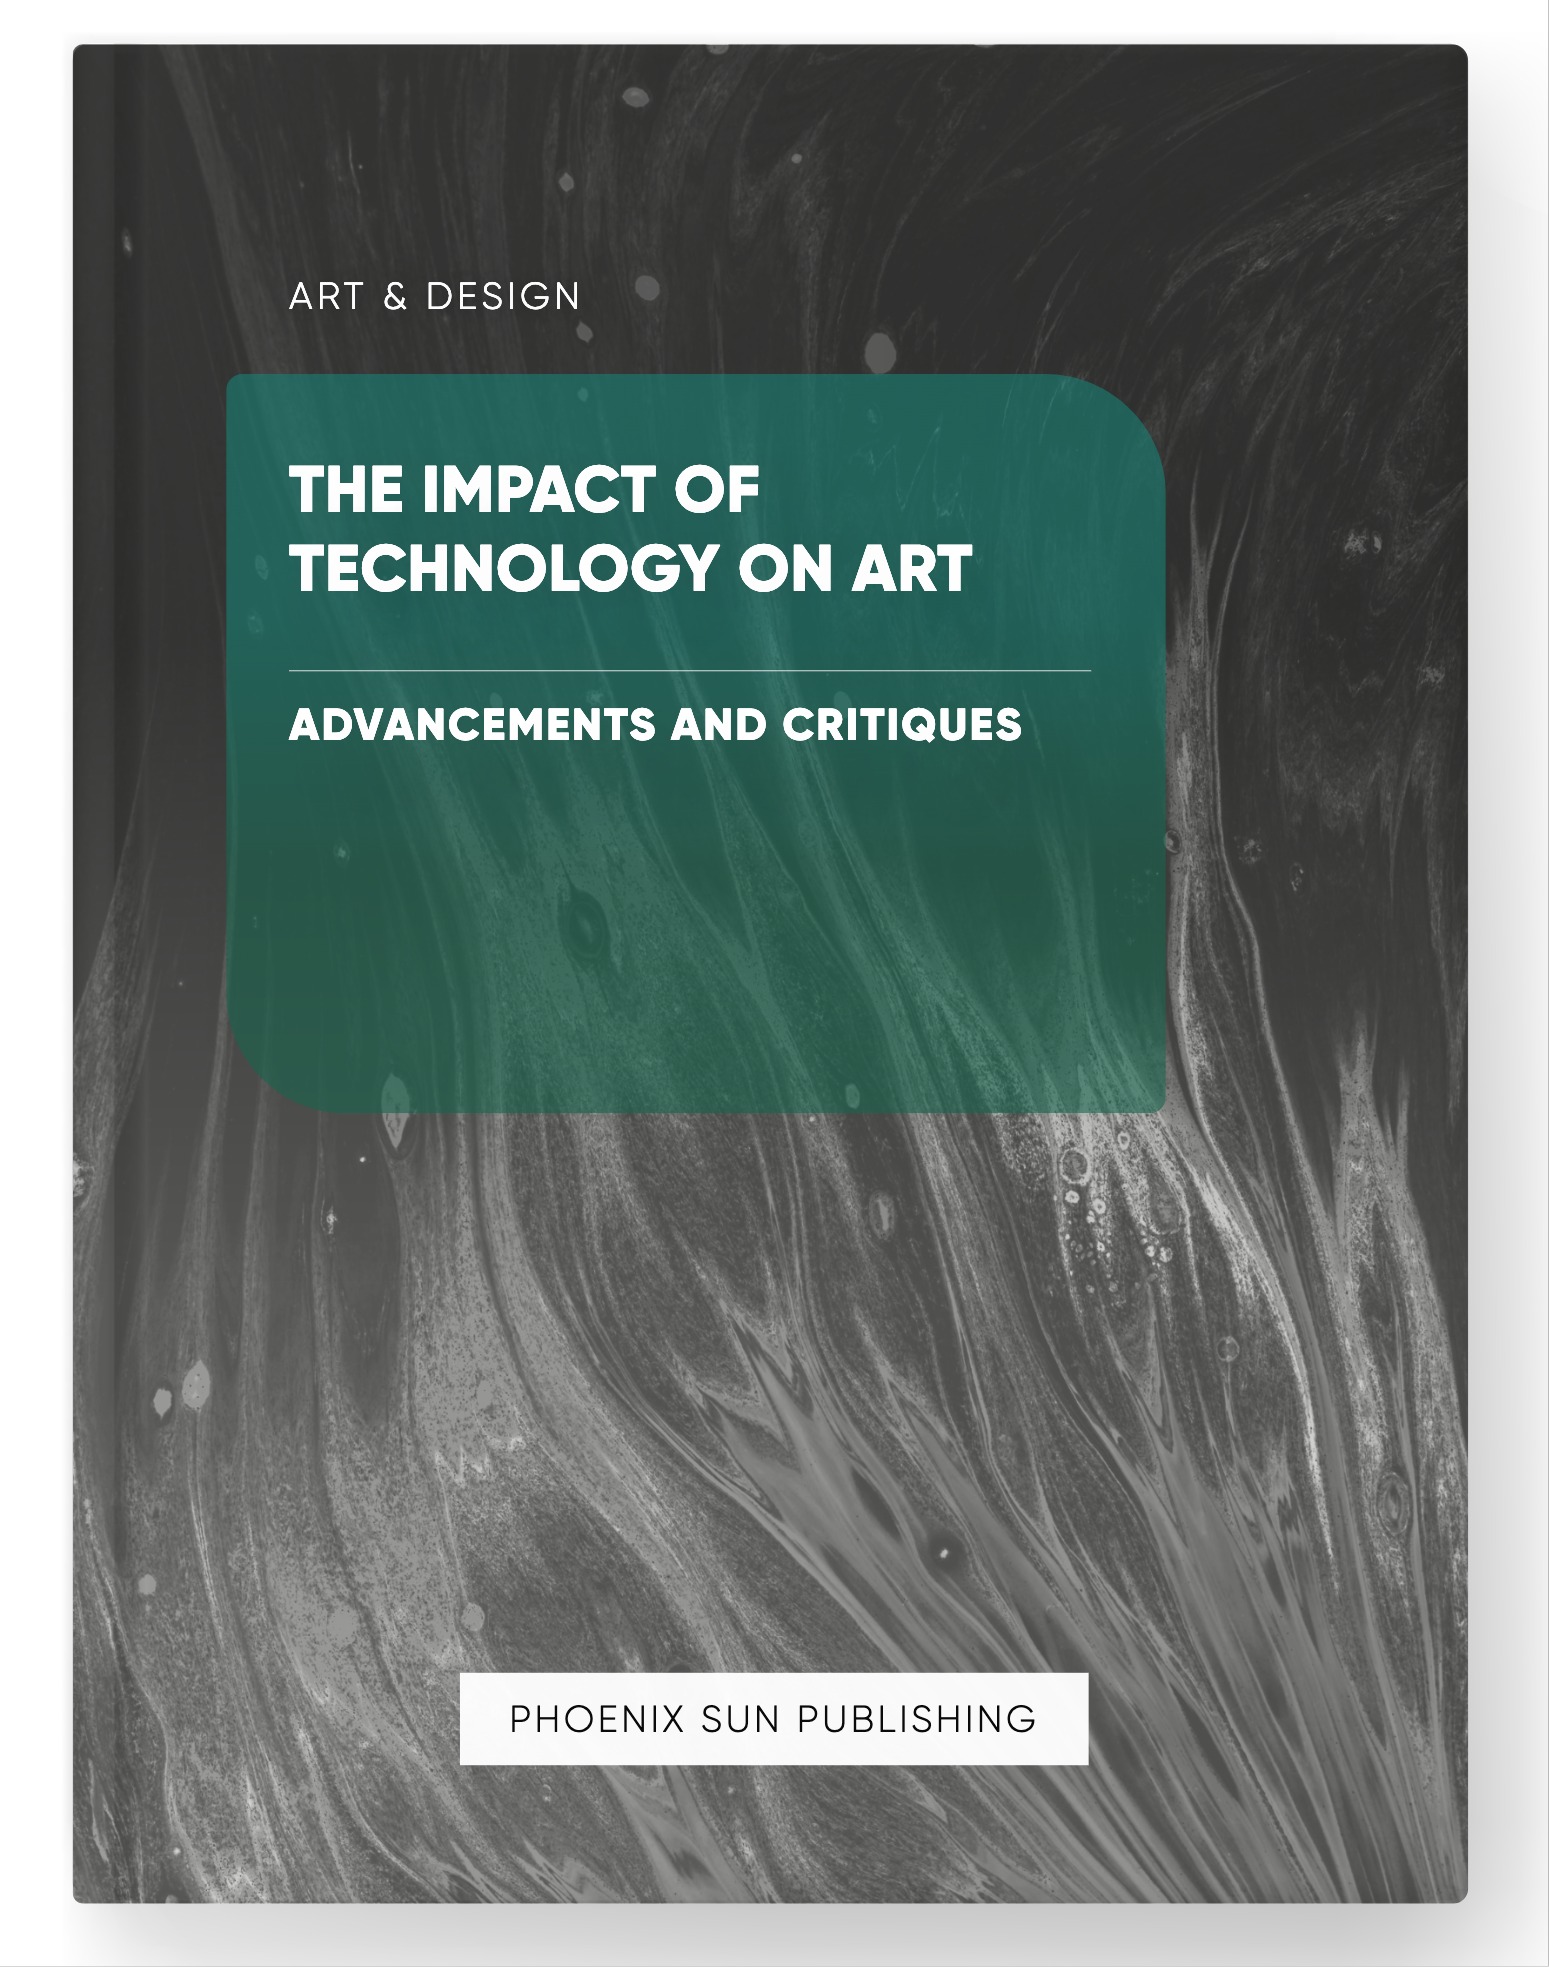 The Impact of Technology on Art – Advancements and Critiques